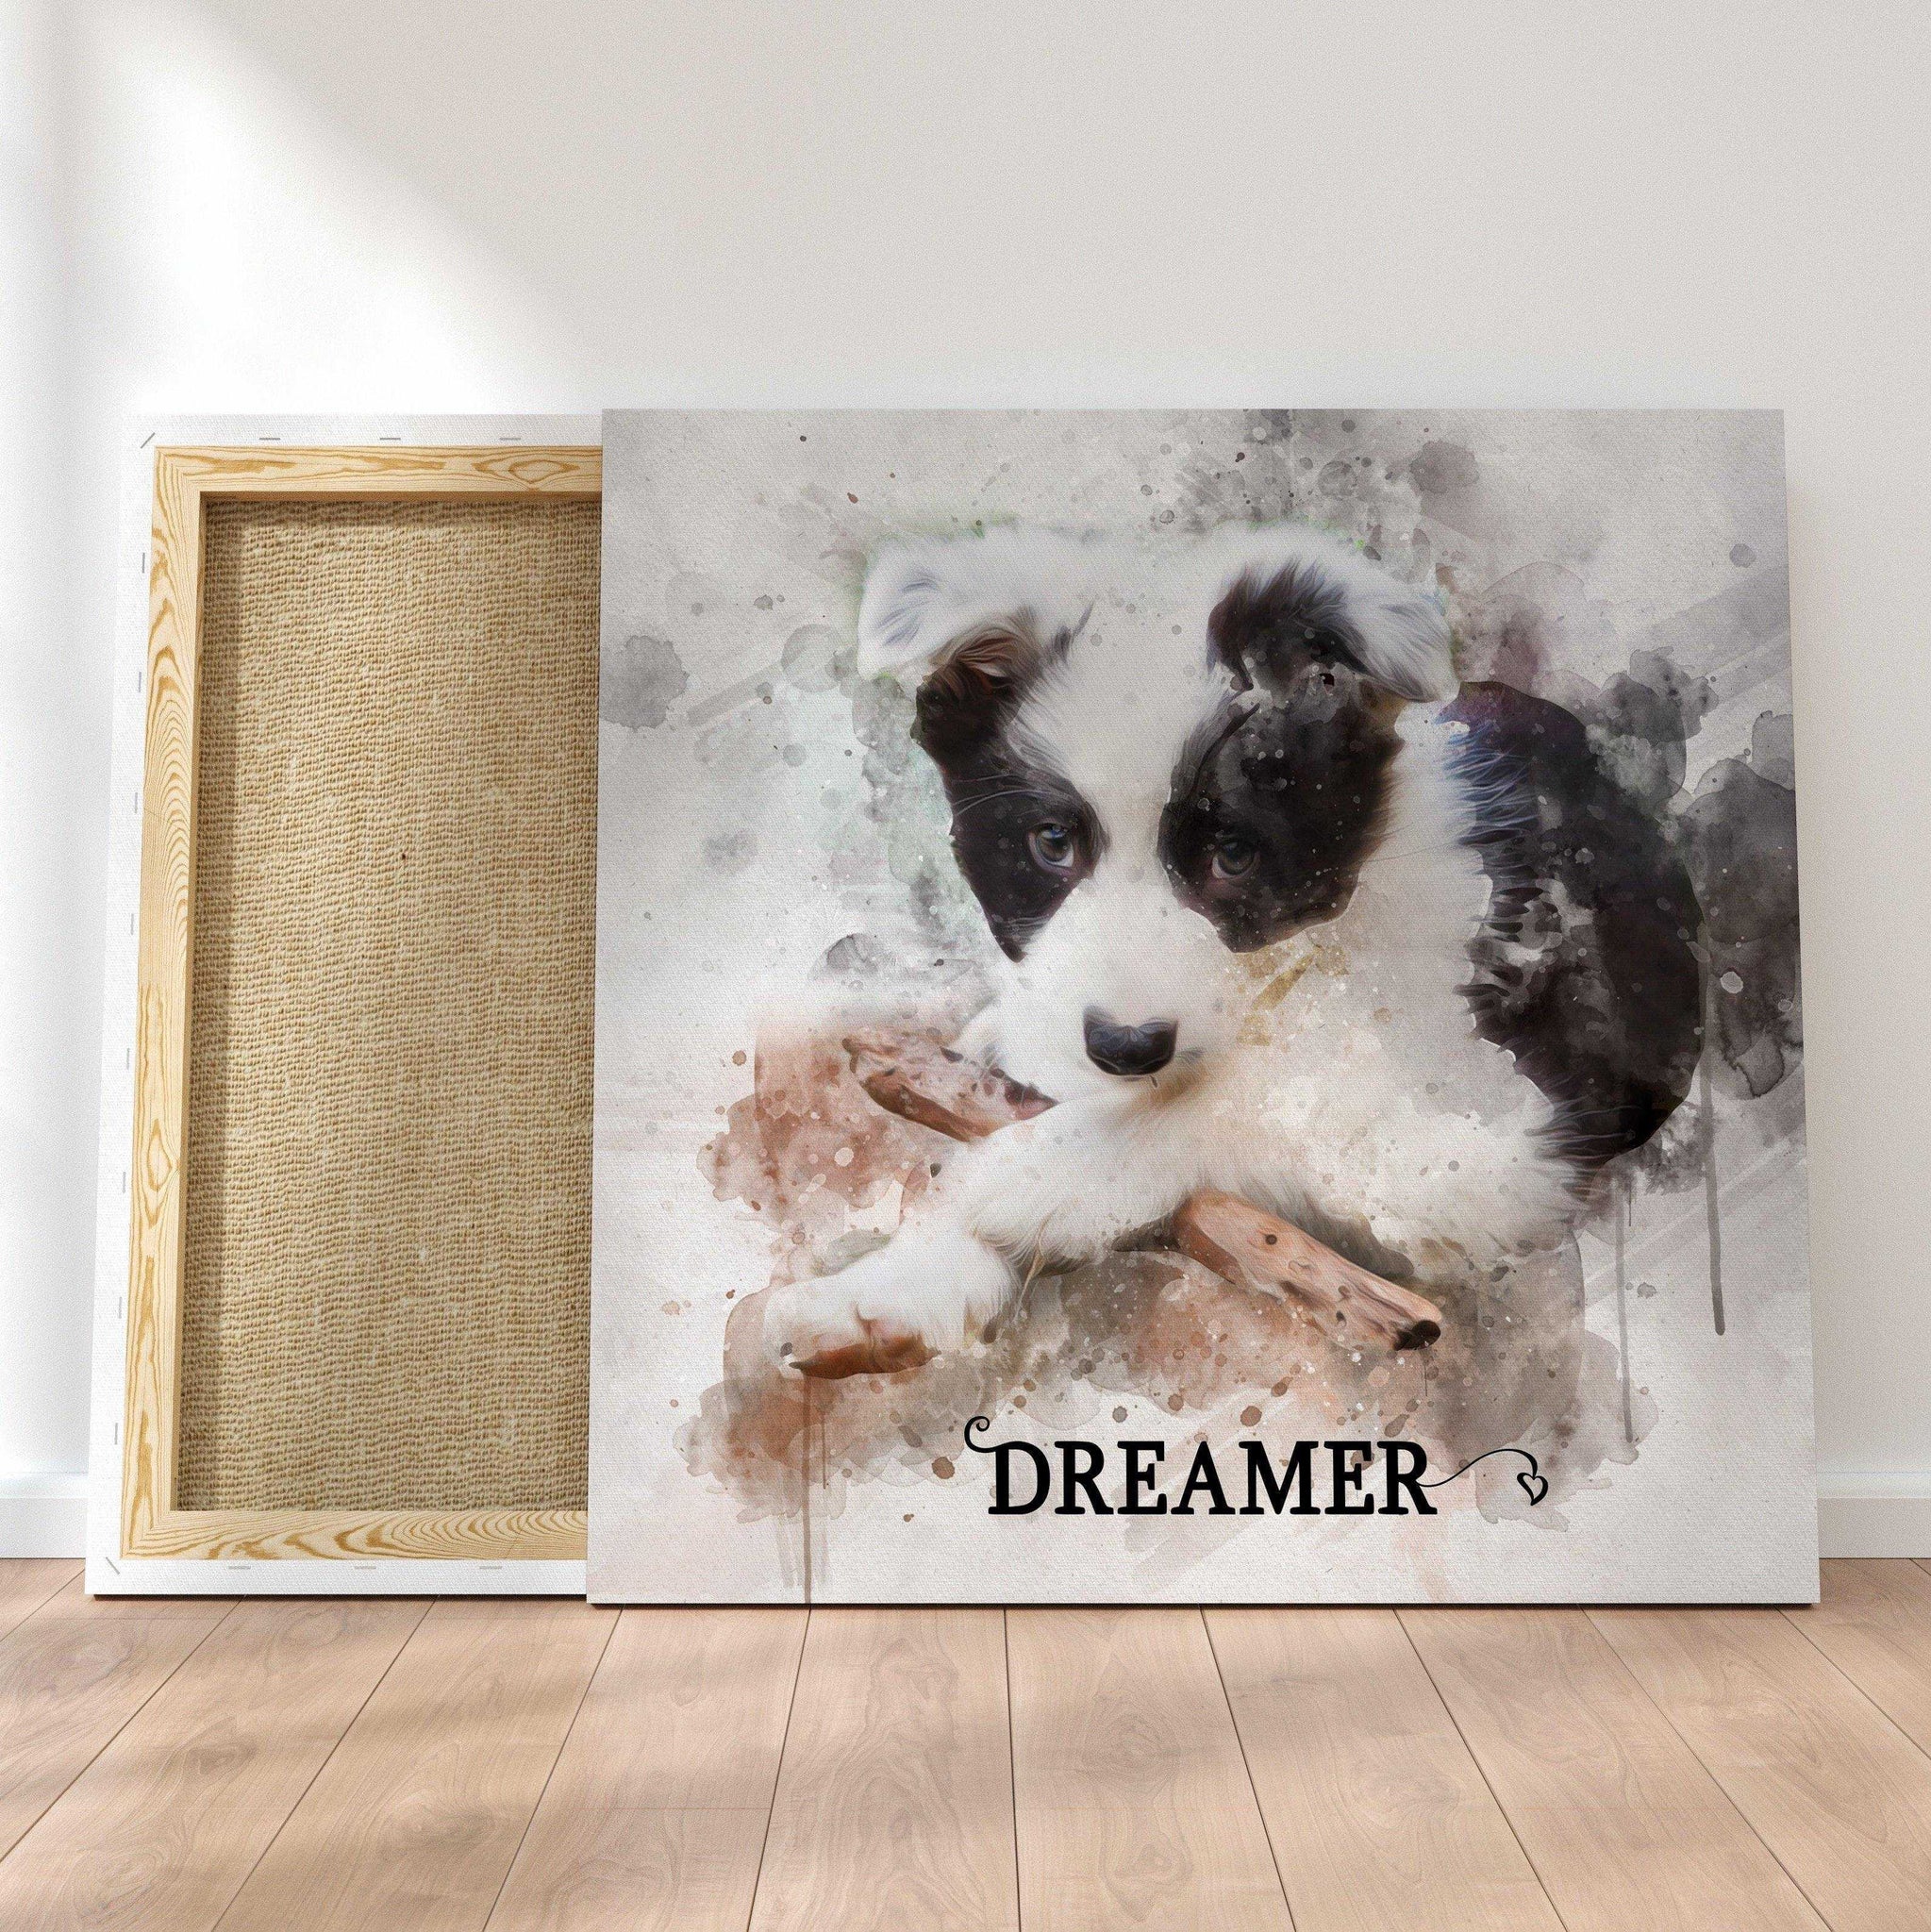 Custom Dog Portraits | Personalized Dog Painting | Canvas Dog Portrait from Photo - FromPicToArt